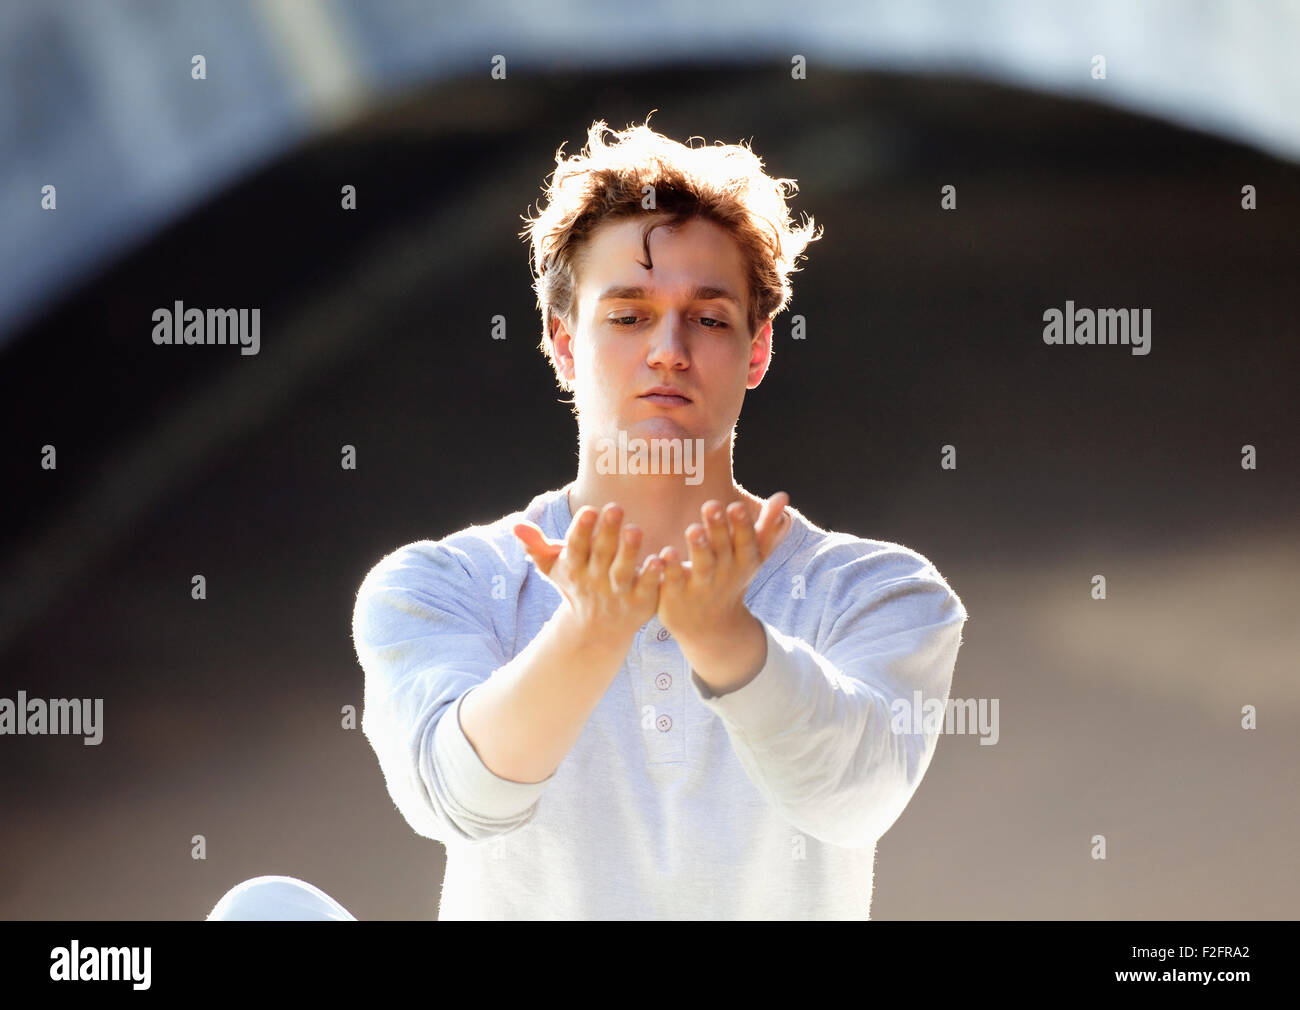 Portrait of a Young Man Exercising Yoga Outdoors. Stock Photo